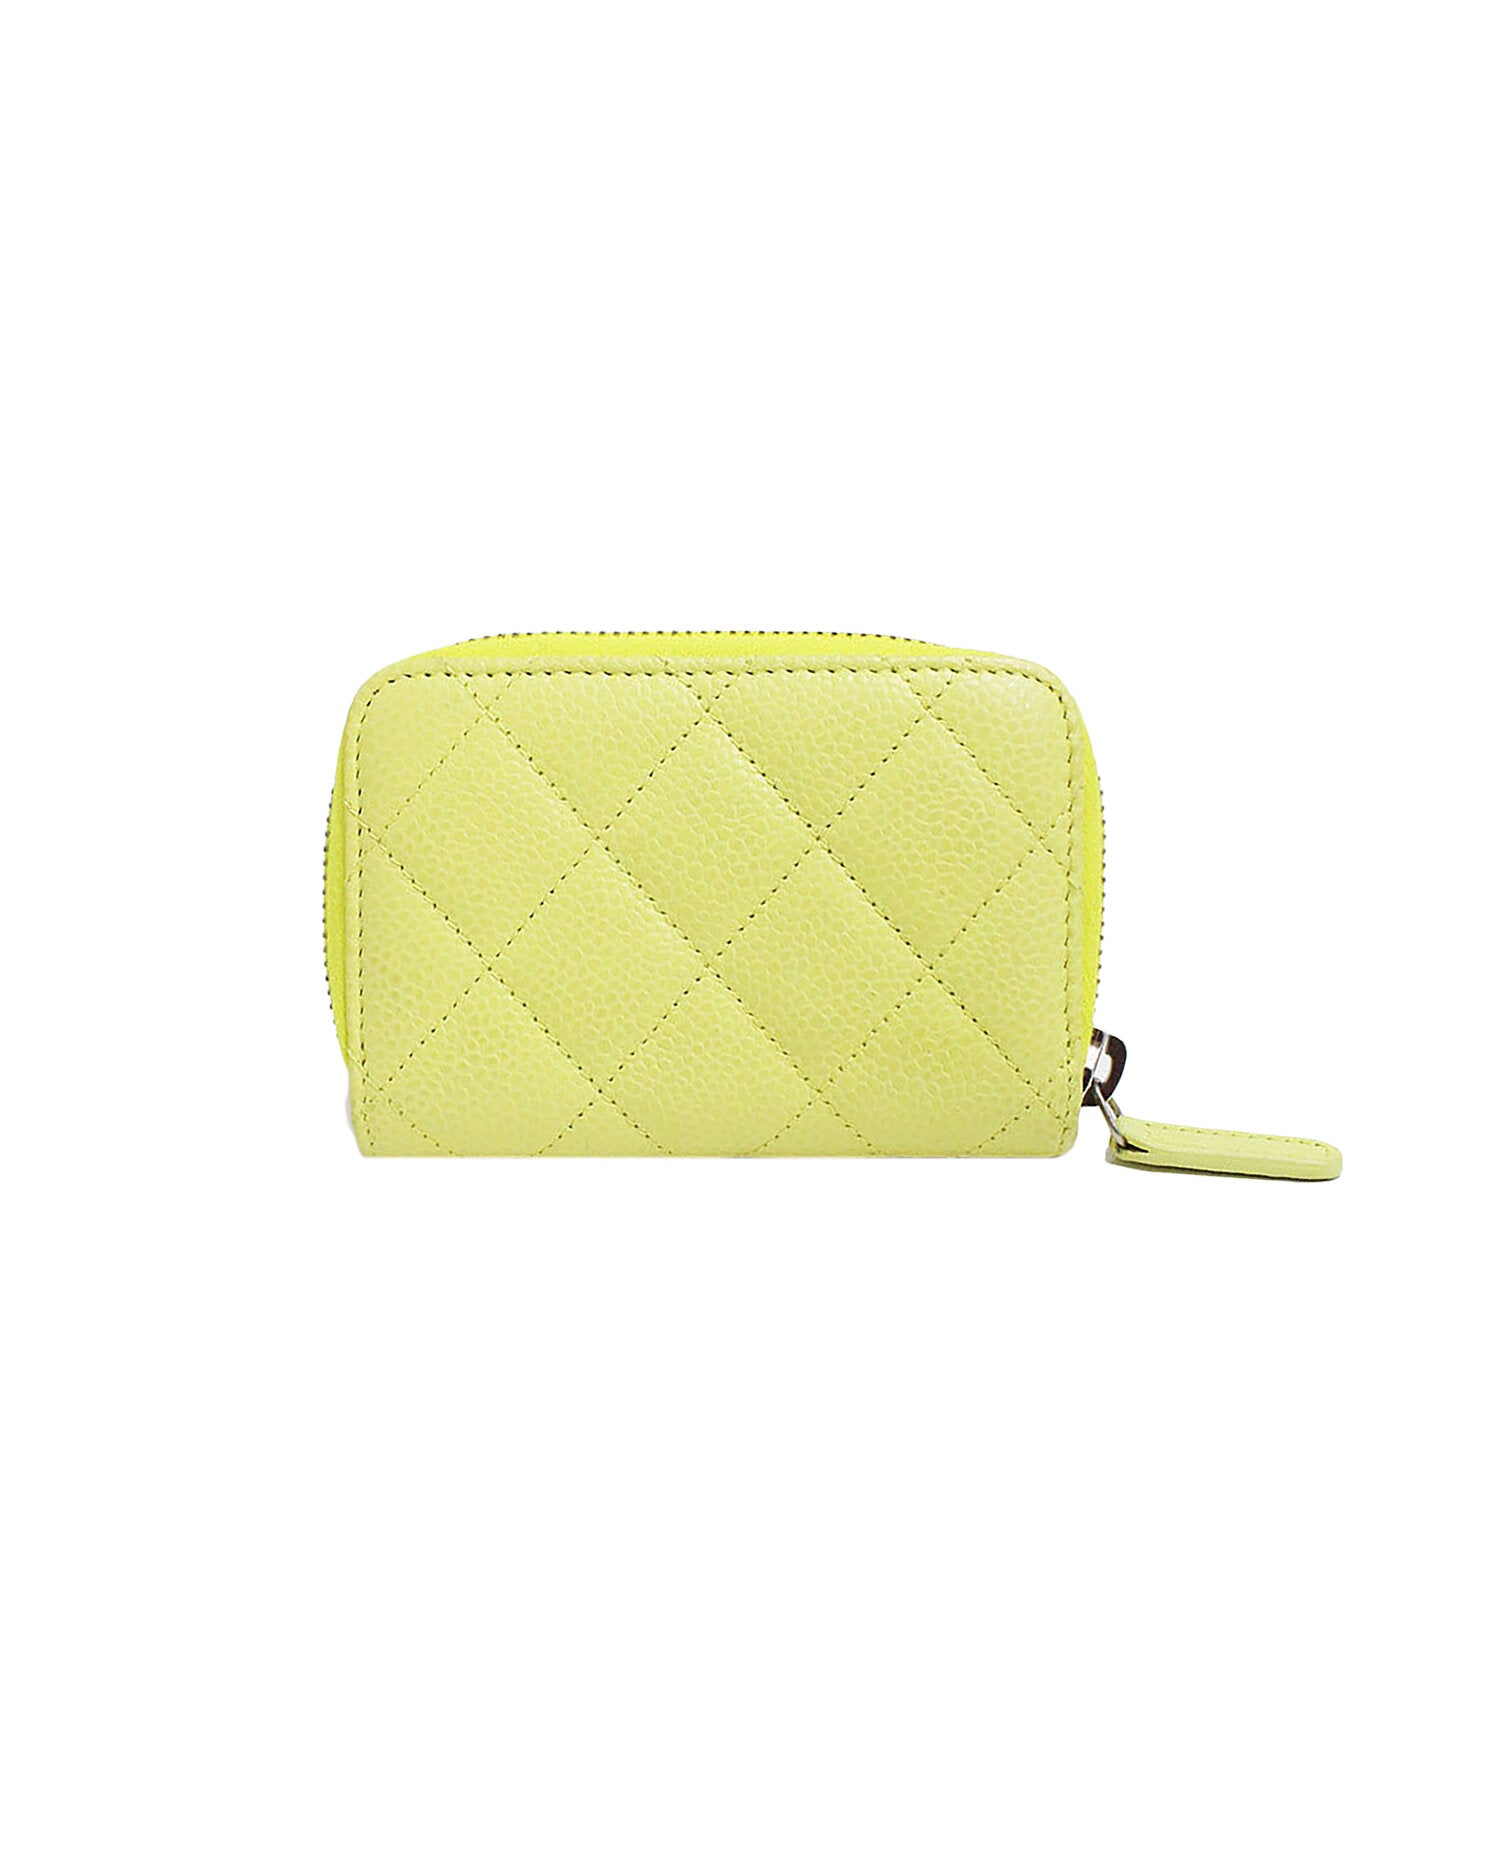 CHANEL Lambskin Quilted Flap Card Holder Wallet Yellow 709349